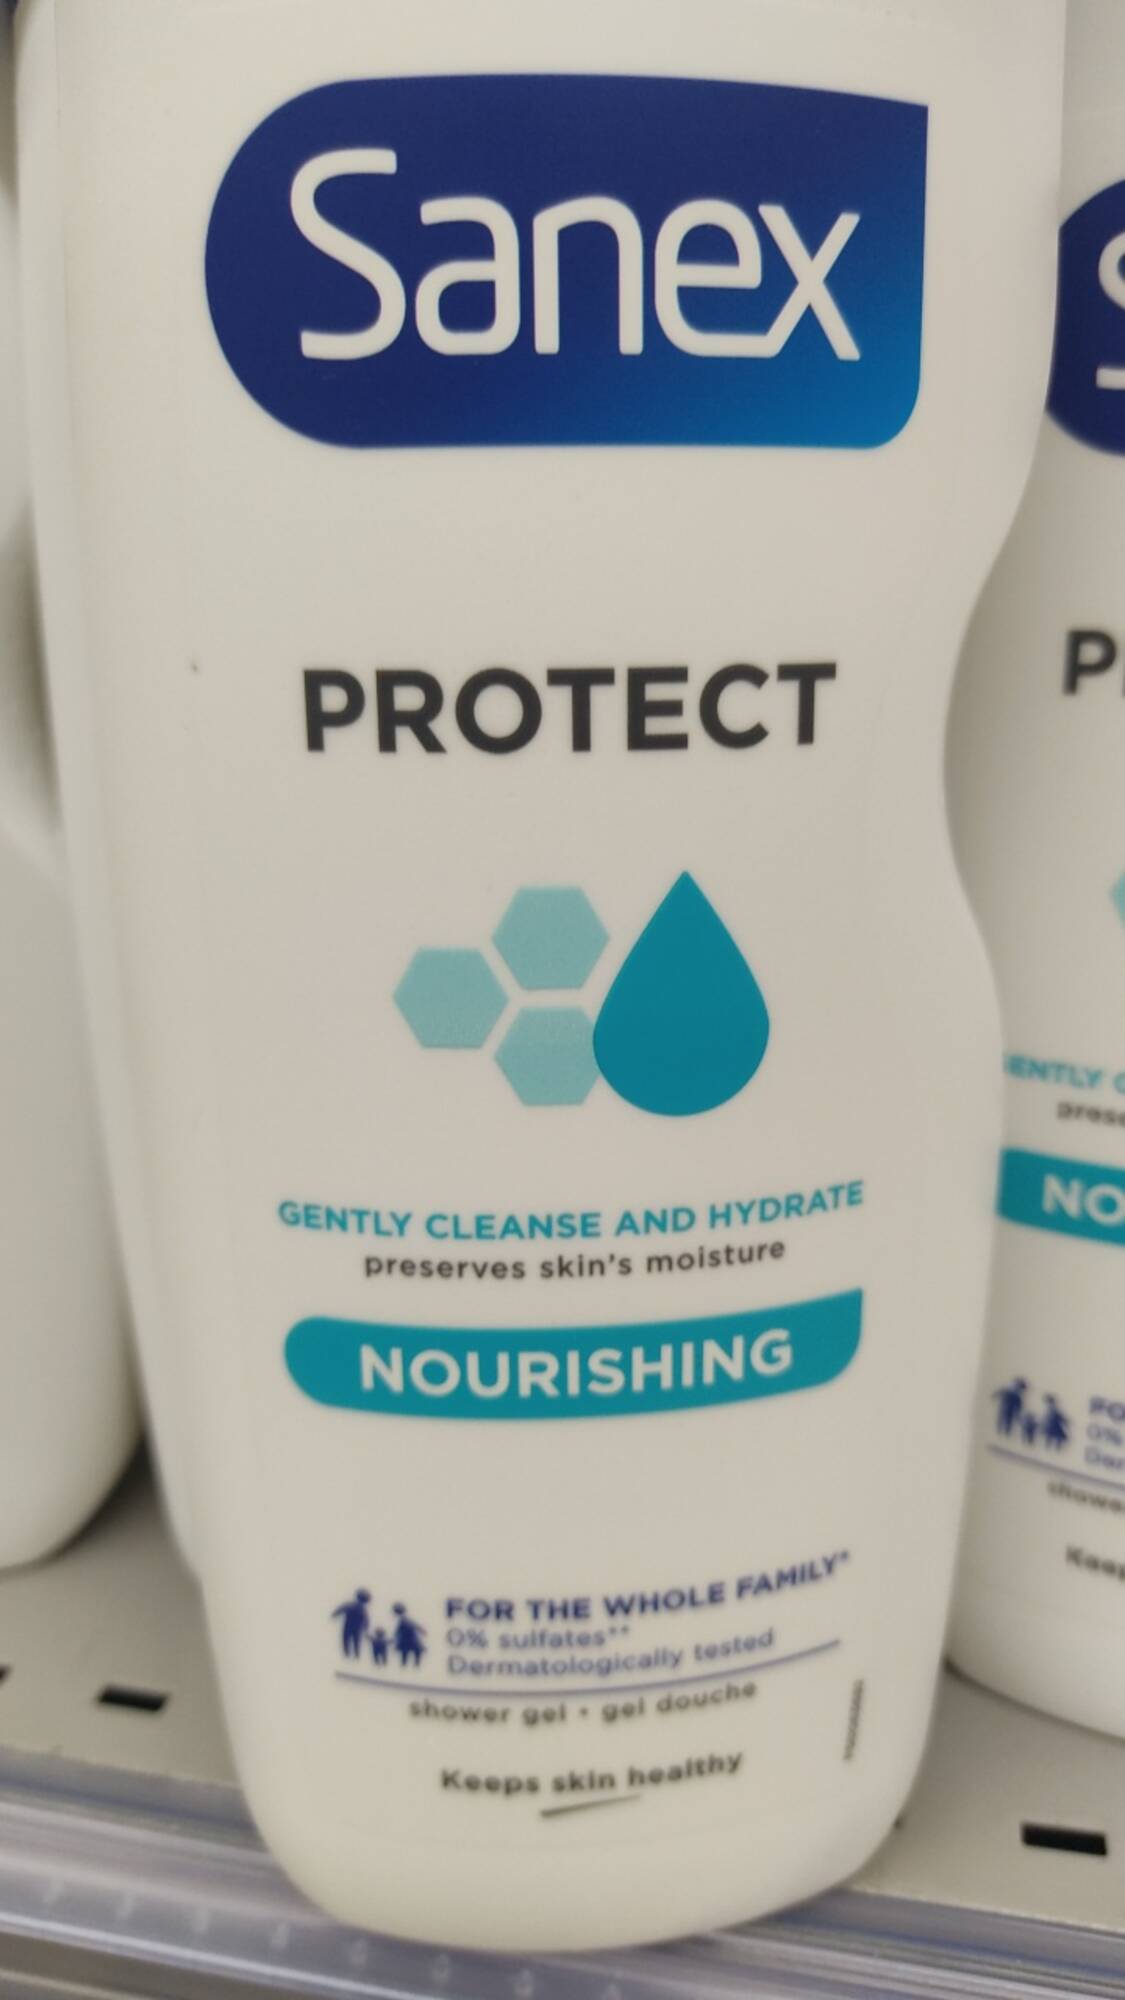 SANEX - Protect - Gently cleanse and hydrate